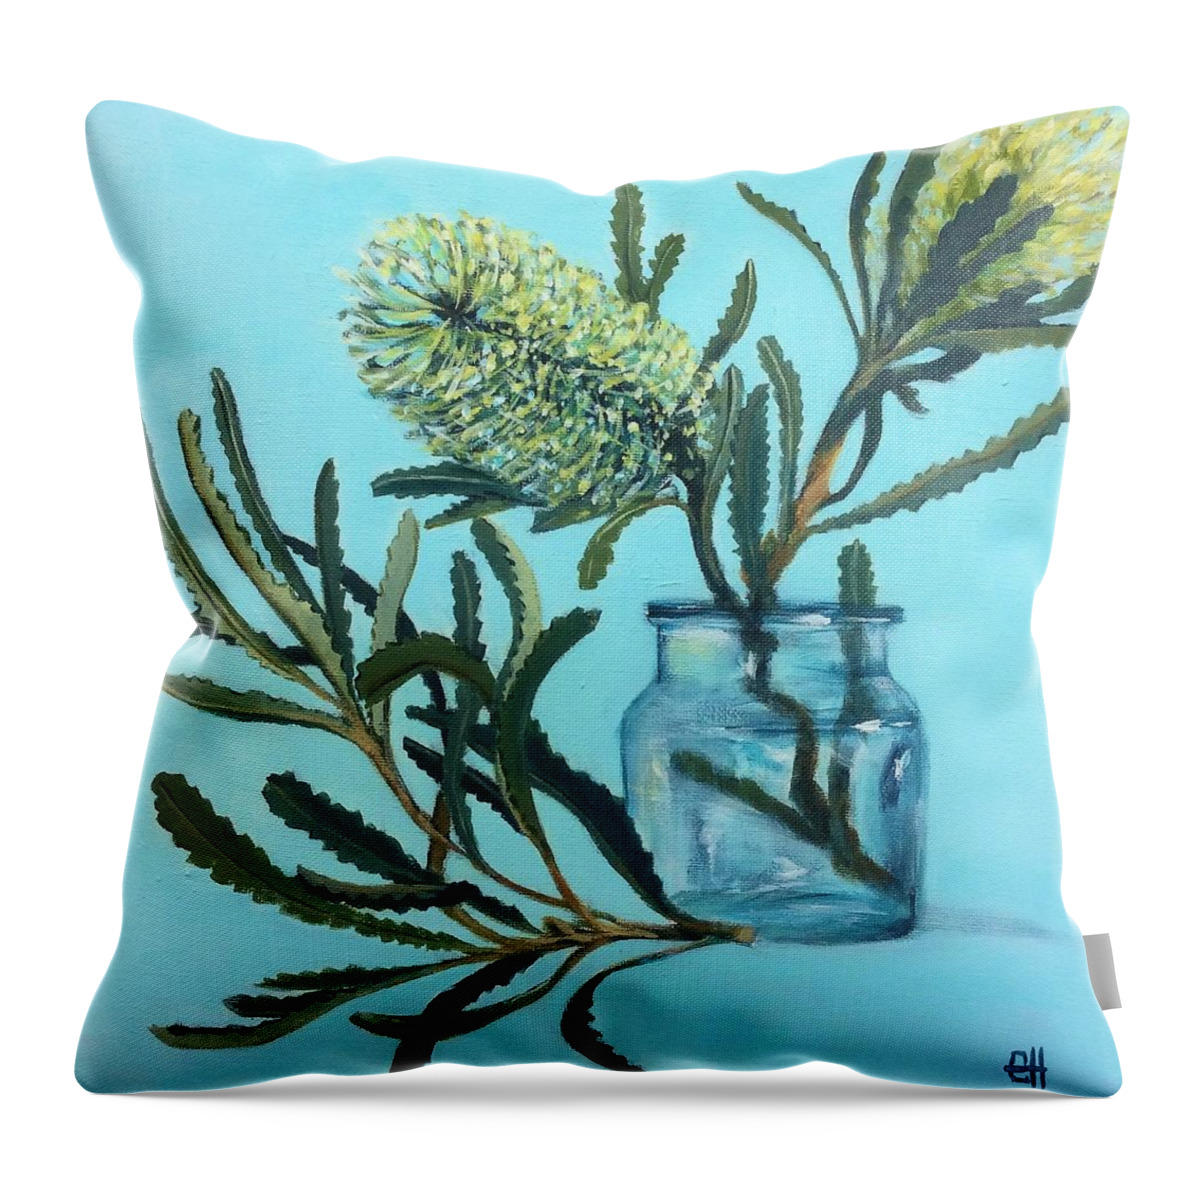 Banksia Robur Throw Pillow featuring the painting Banksia Australian Native Painting by Chris Hobel